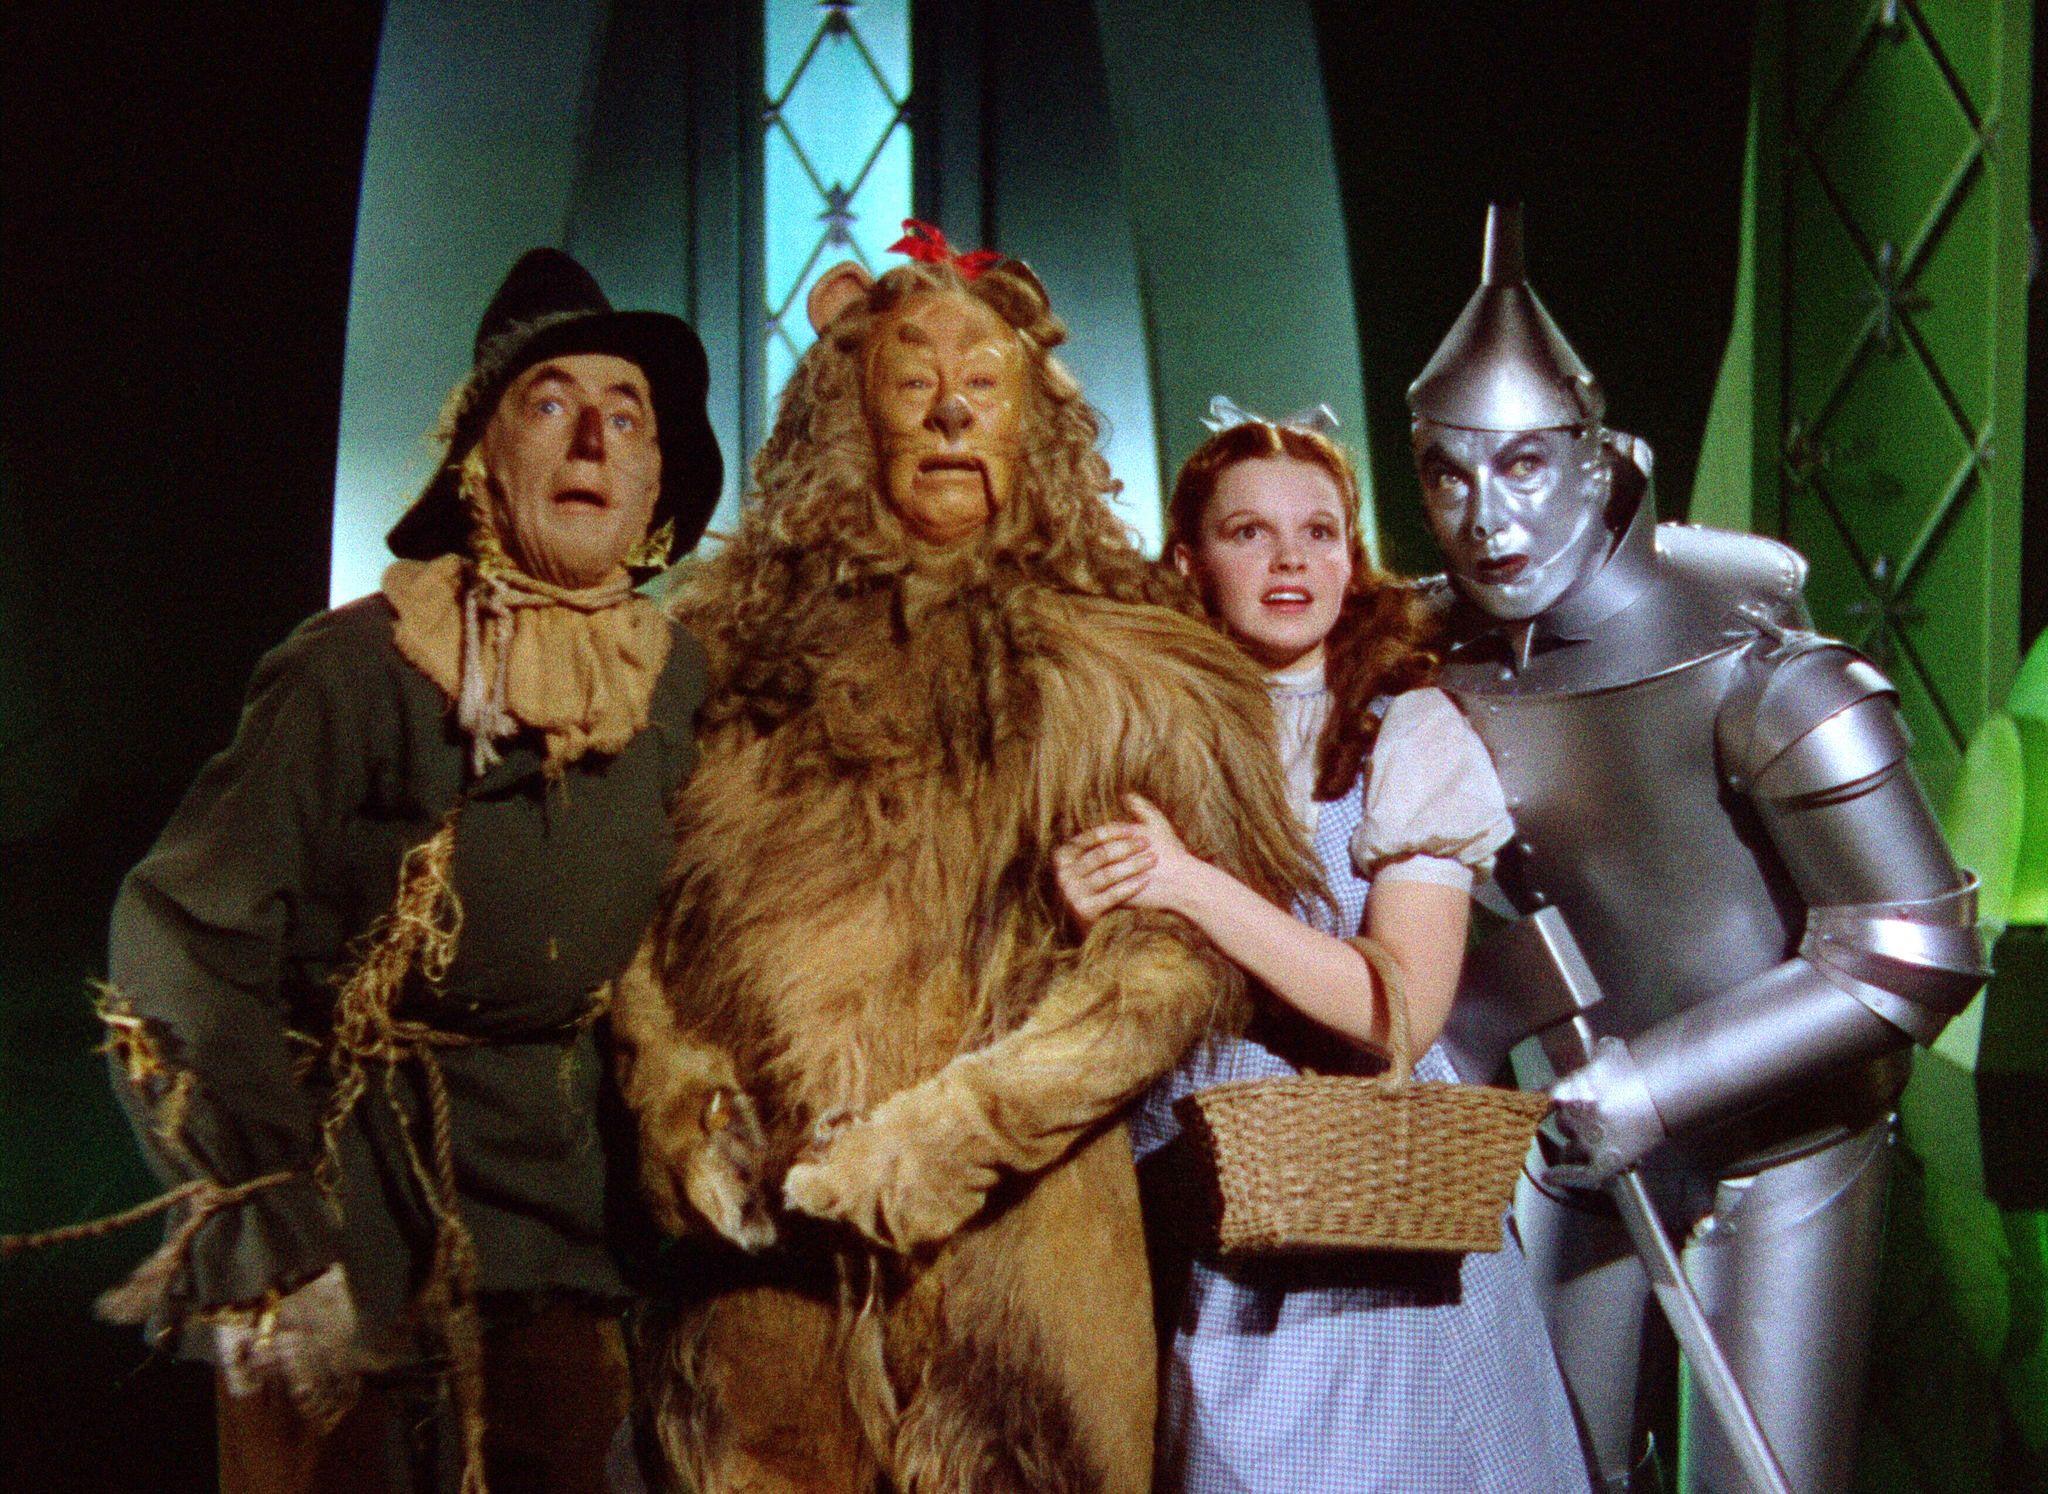 The Wizard of Oz: From Judy Garland to Emerald City and Beyond.